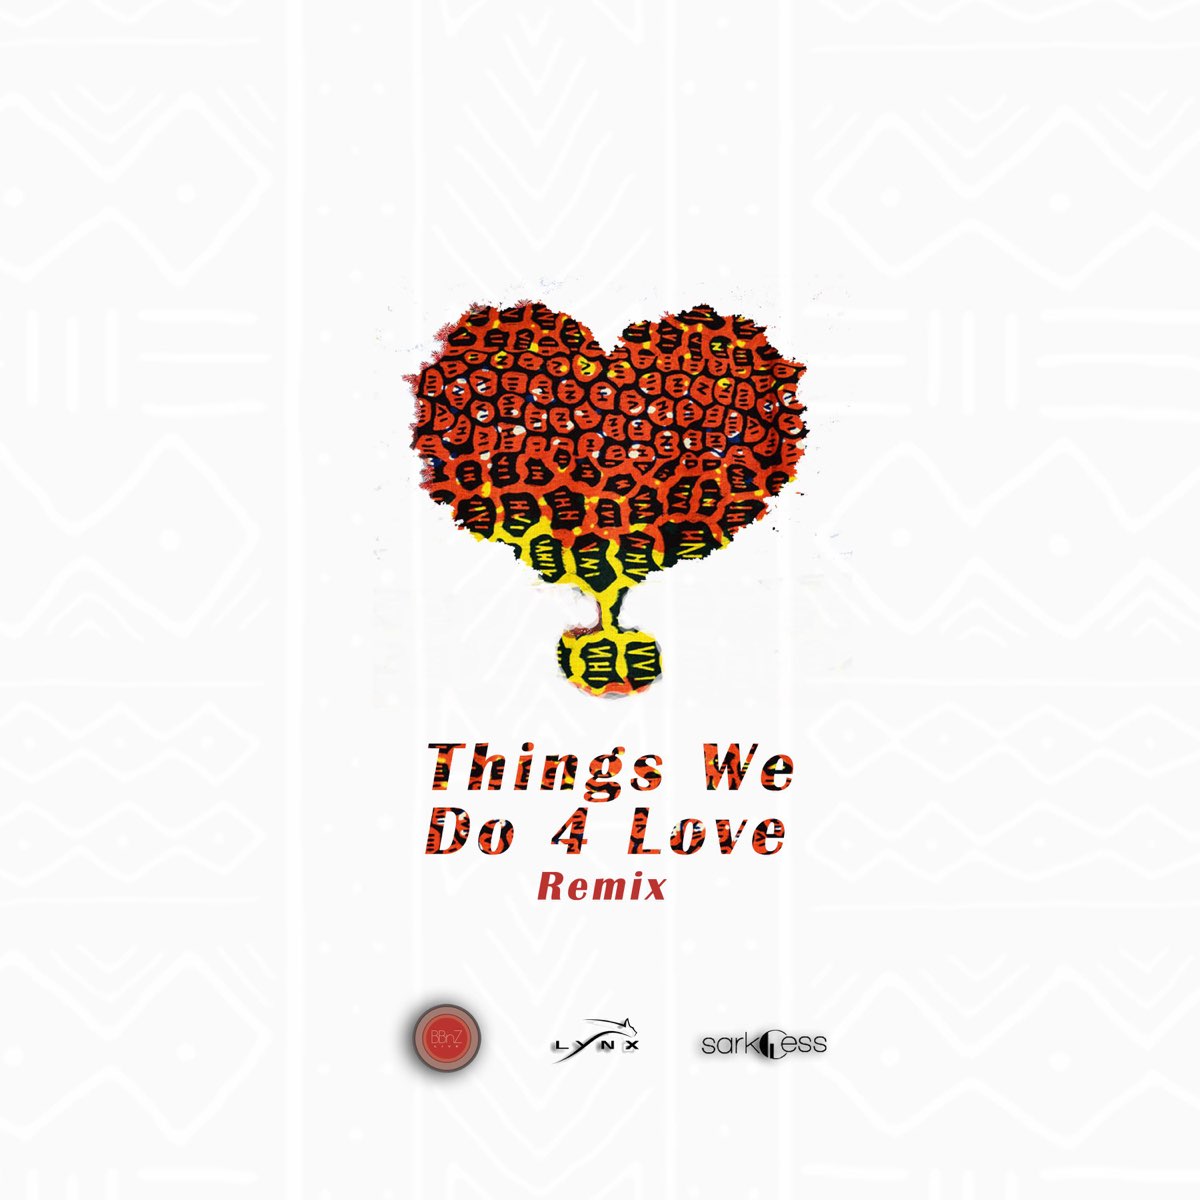 G love remix. Love Remix. Jazzamor / things we do for Love обложка. Love things. The Sounds things we do for Love.